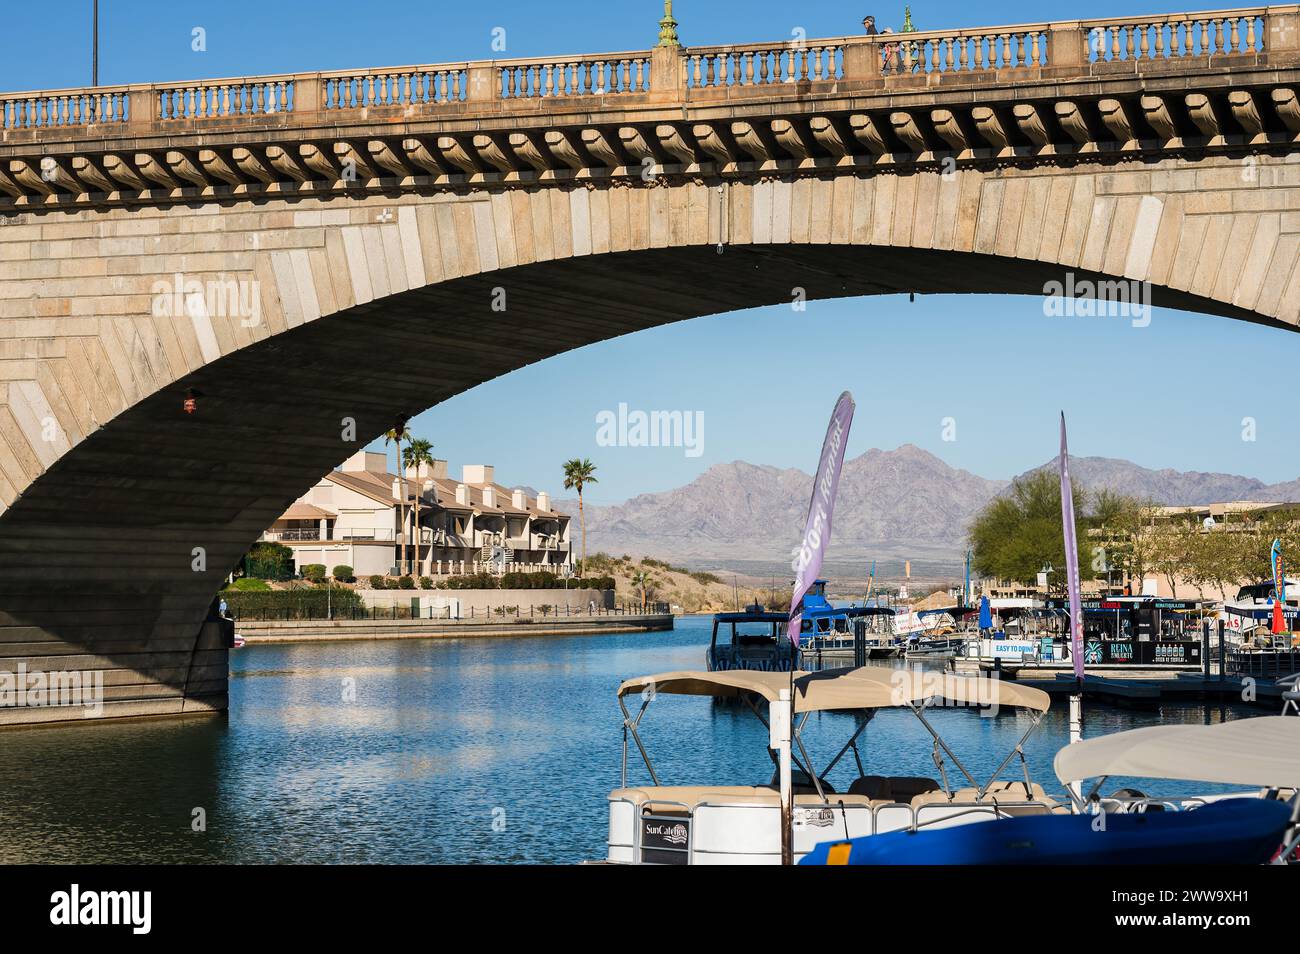 Tourists near the old London Bridge, which was relocated from London England in the 1970’s to Lake Havasu Arizona. Stock Photo